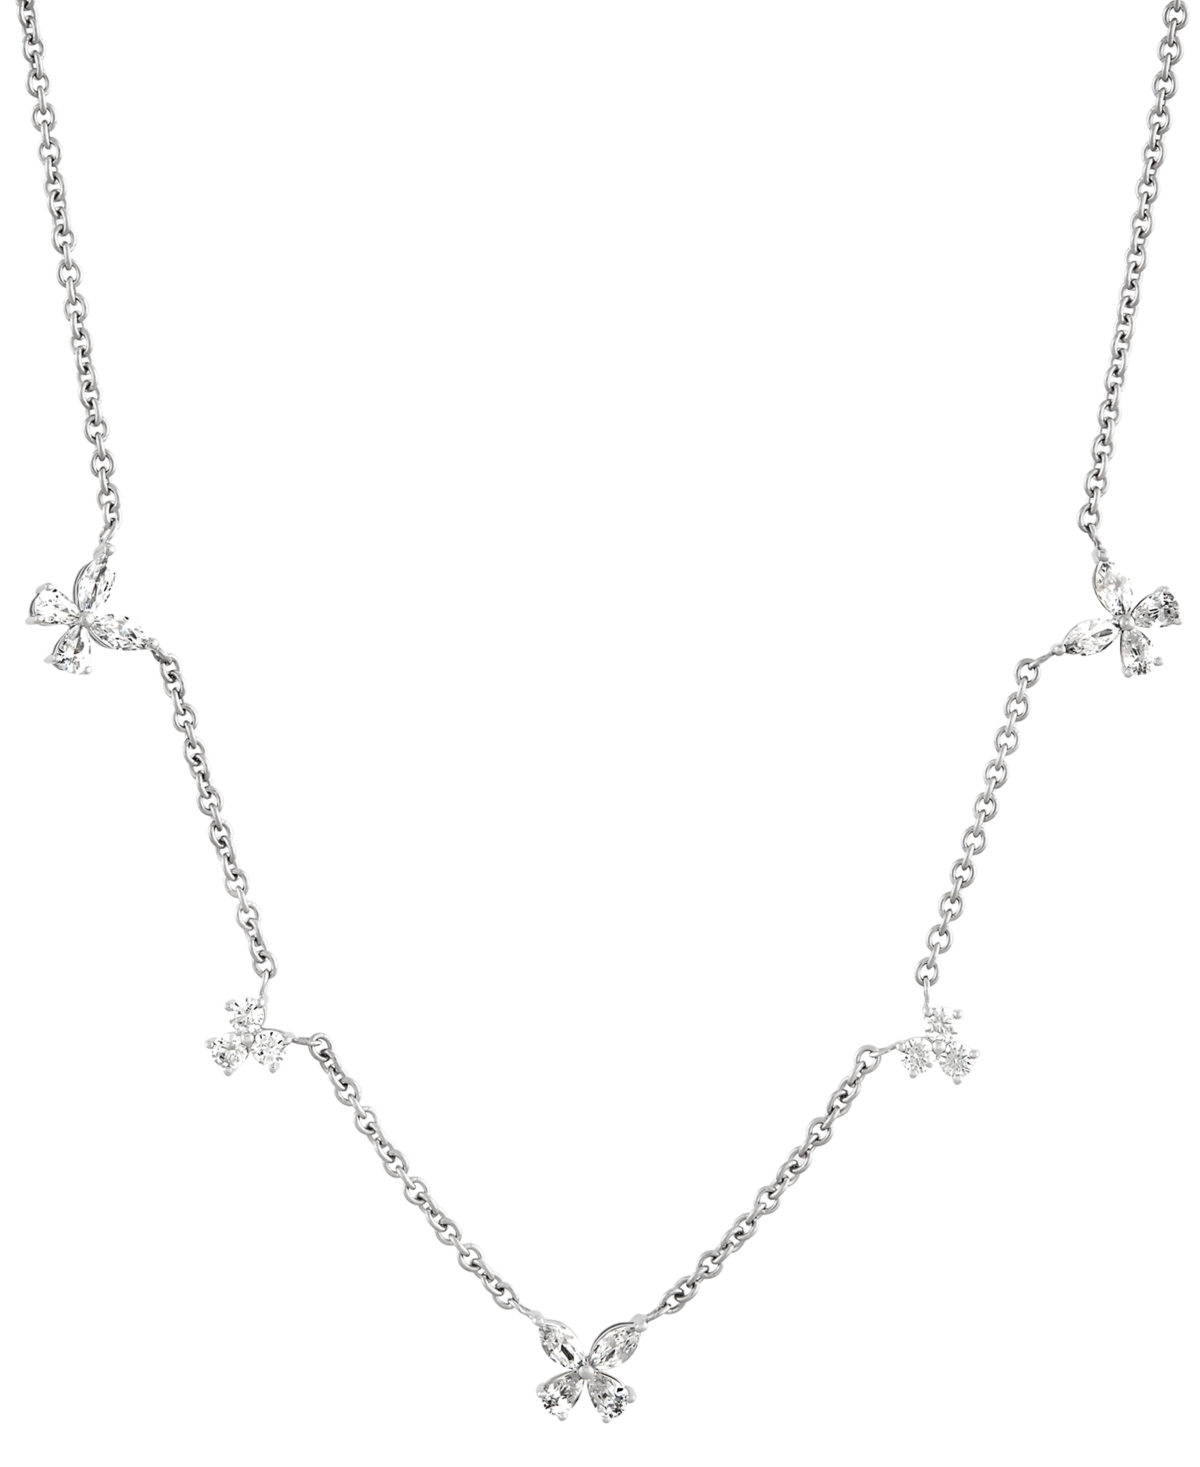 Lab Grown Diamond Flower Cluster Collar Necklace (1 ct. t.w.) in 14k White Gold, 18" + 2" extender - White Gold